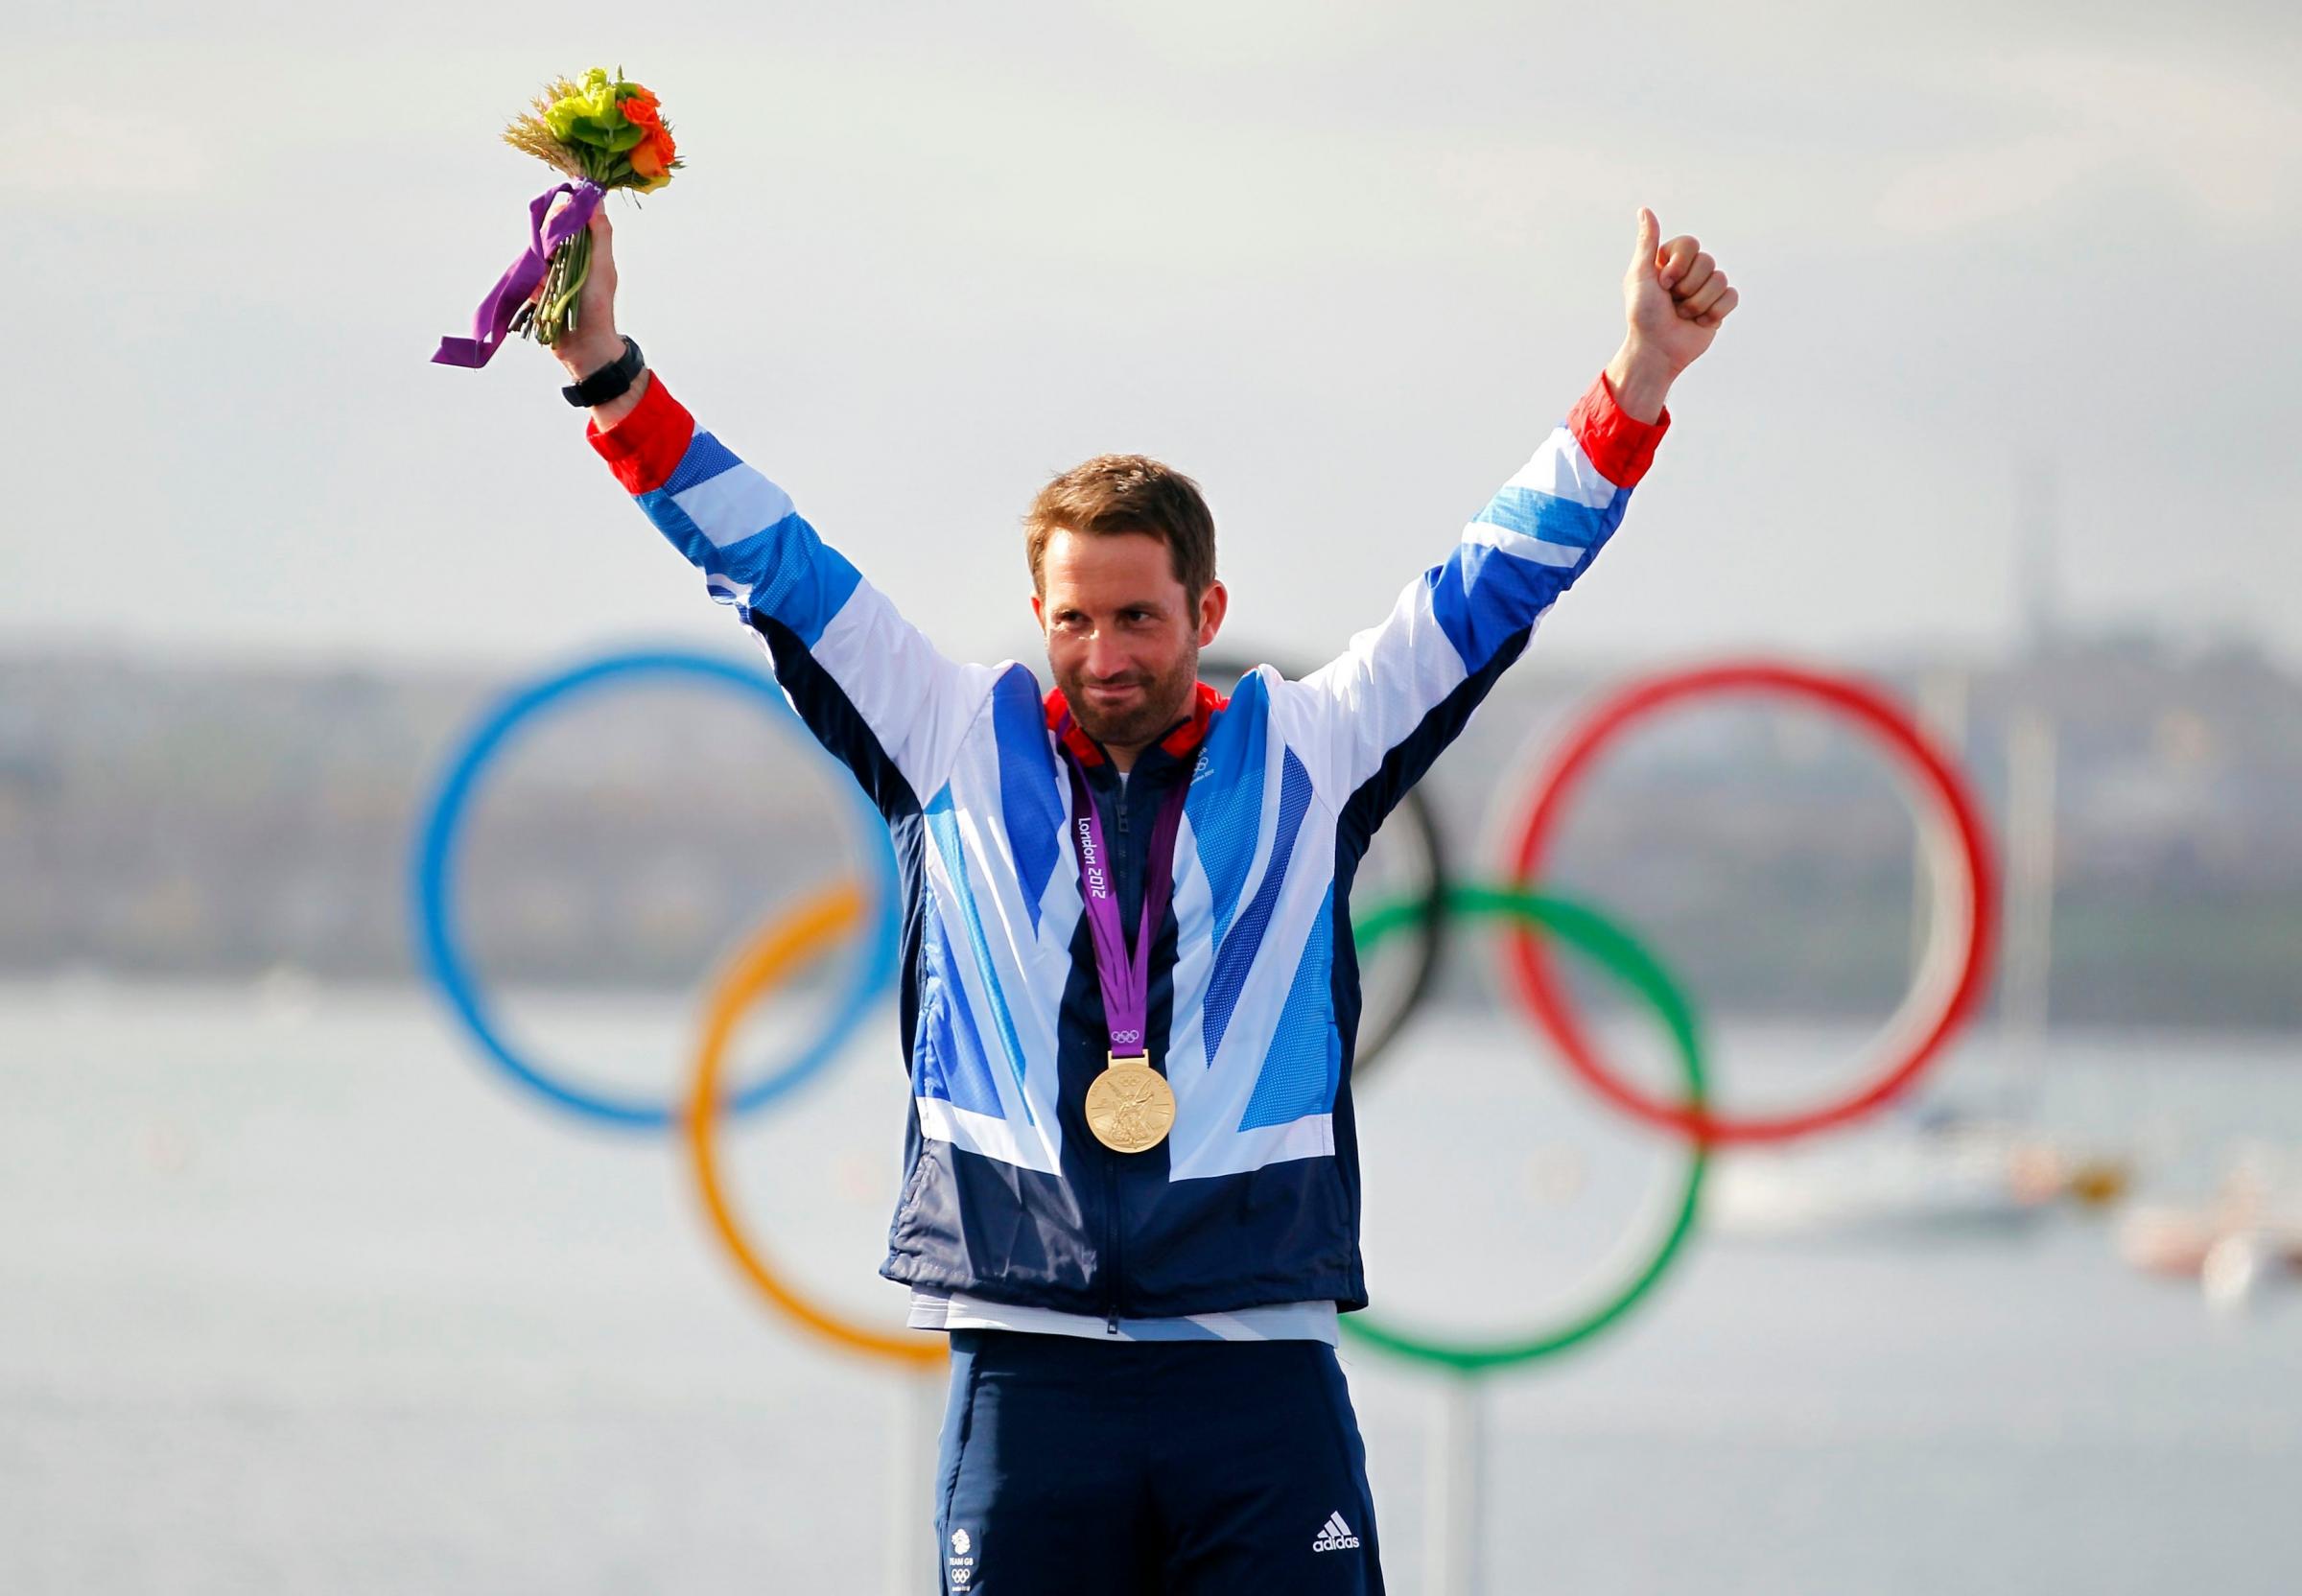 Great Britains Ben Ainslie celebrates on the podium after winning the Gold medal in the Finn class sailing in Weymouth, during day nine of the London 2012 Olympics. PRESS ASSOCIATION Photo. Picture date: Sunday August 5, 2012. See PA story Olympics